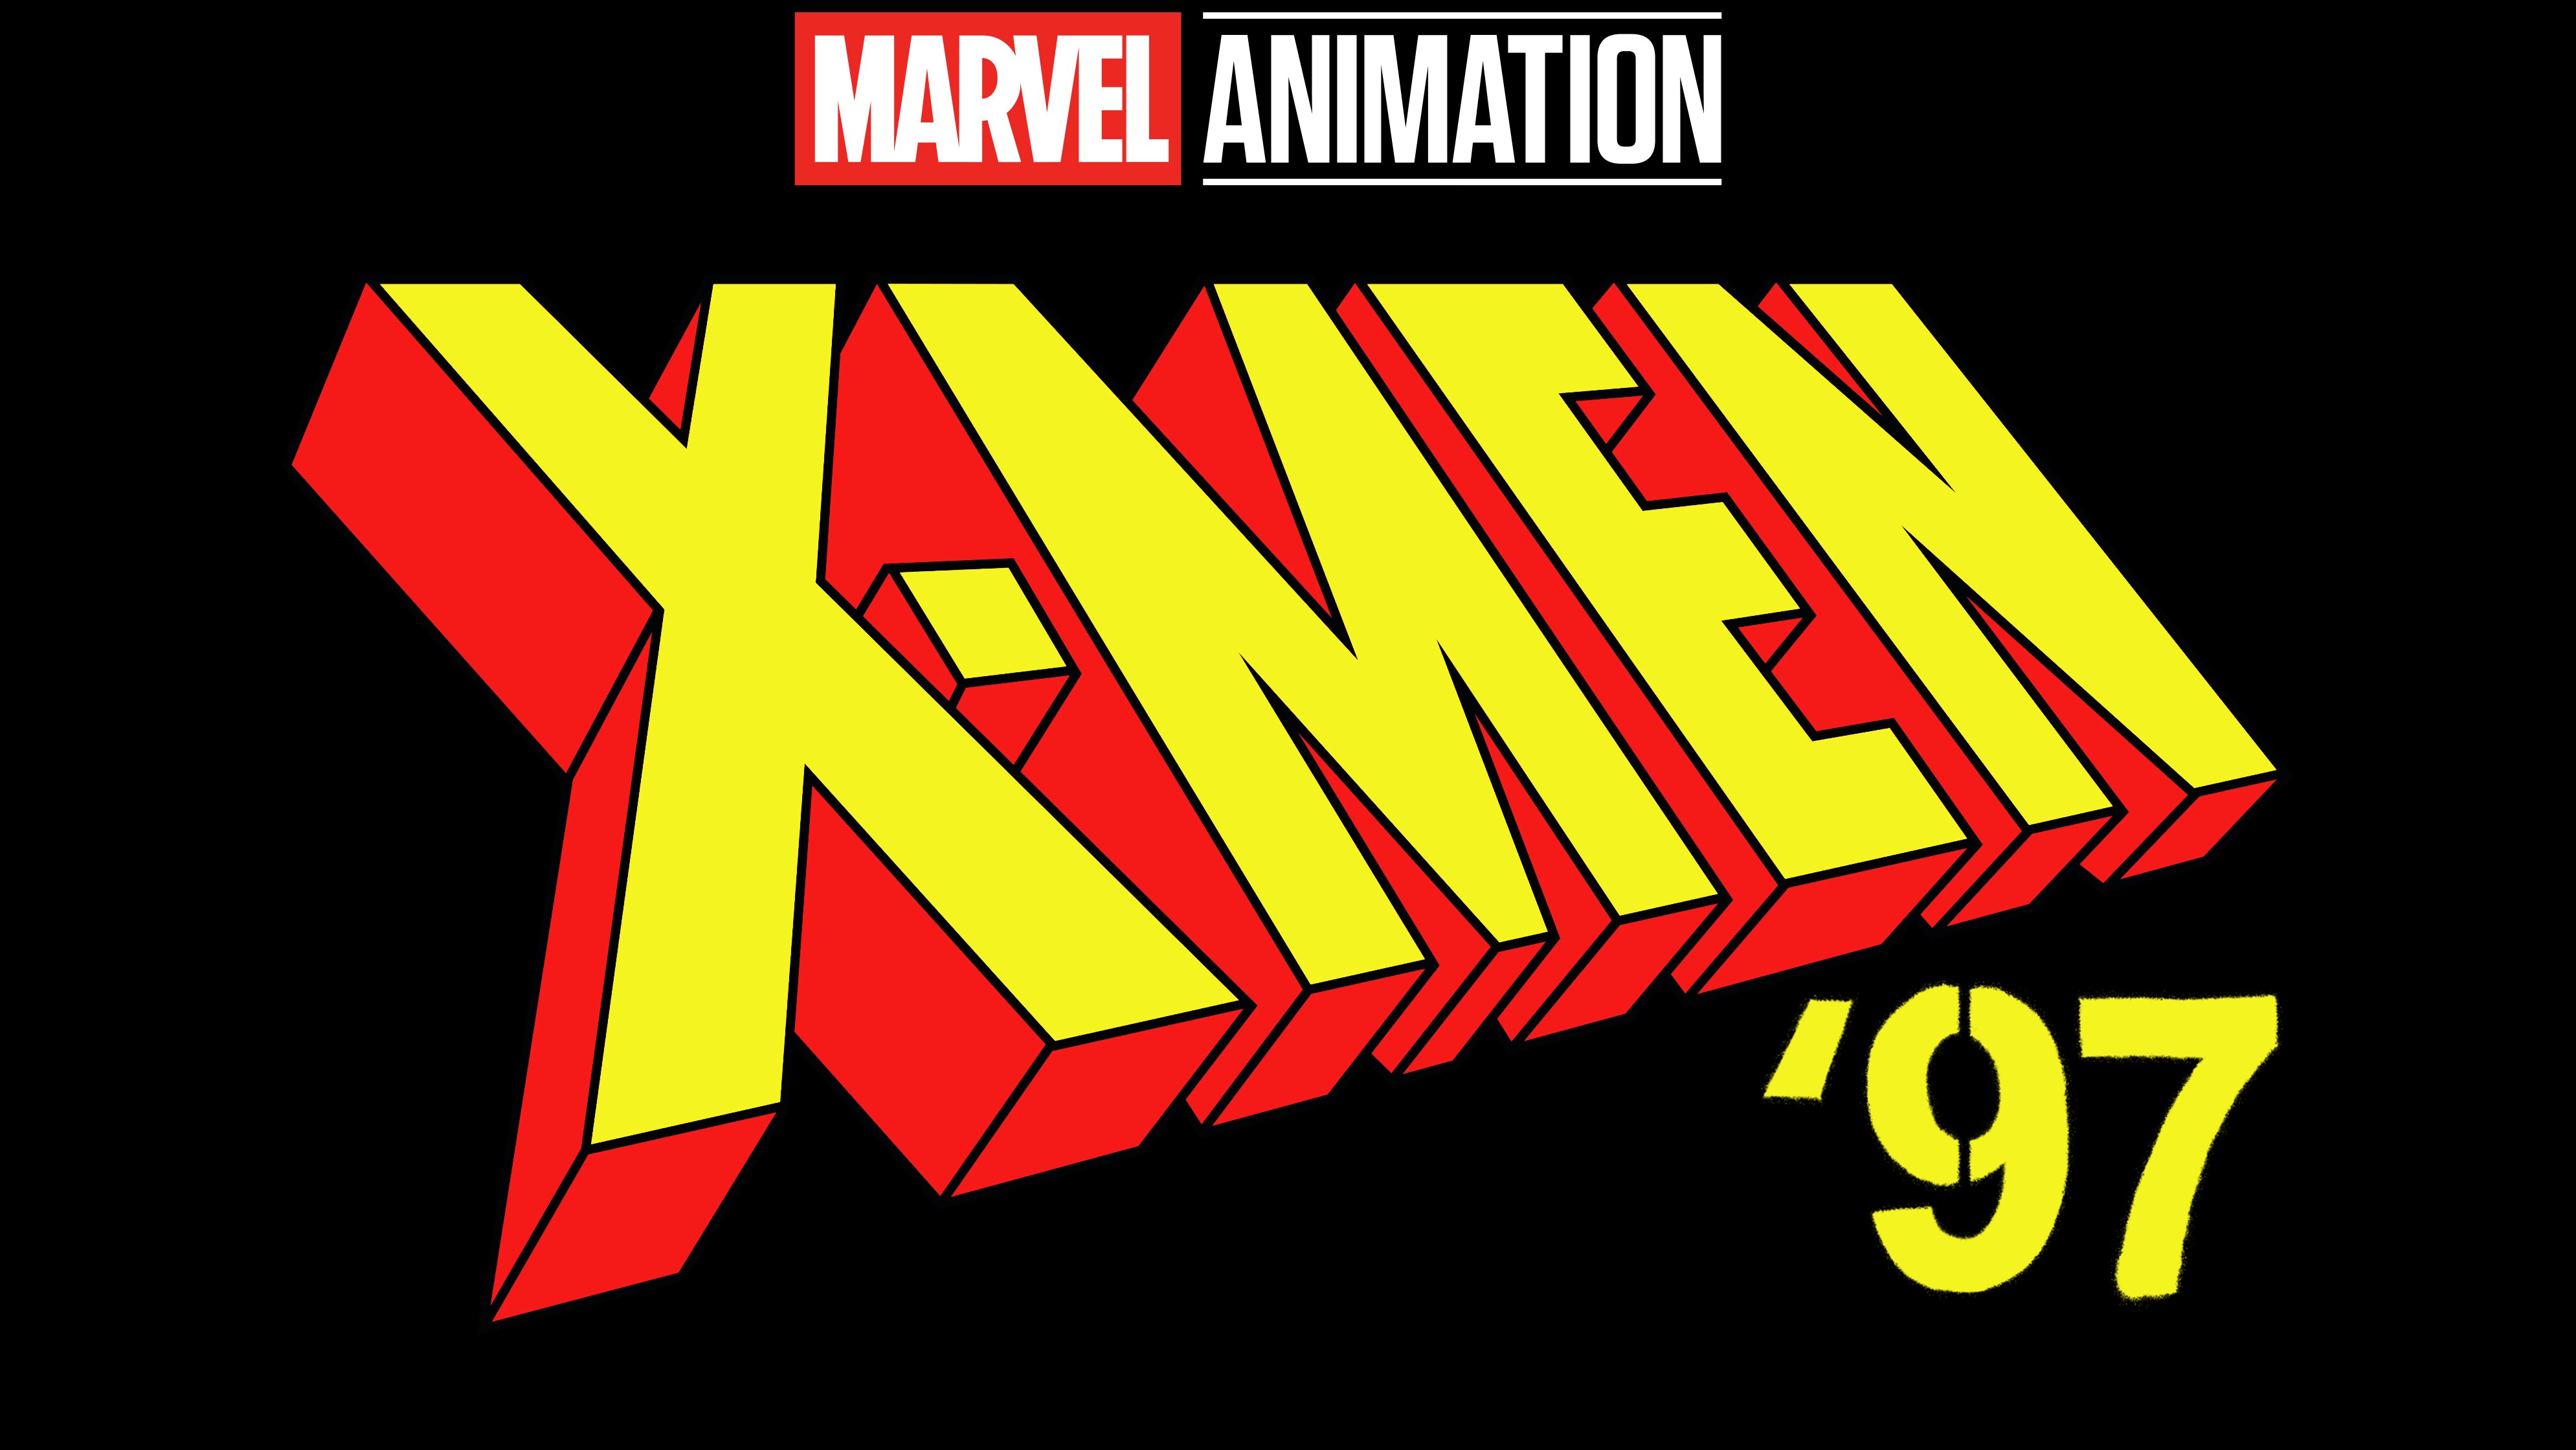 Marvel Animation’s “X-Men ’97” Welcomes Fans to Celebrate Upcoming Launch—Event Images from Hollywood’s El Capitan Theatre Now Available